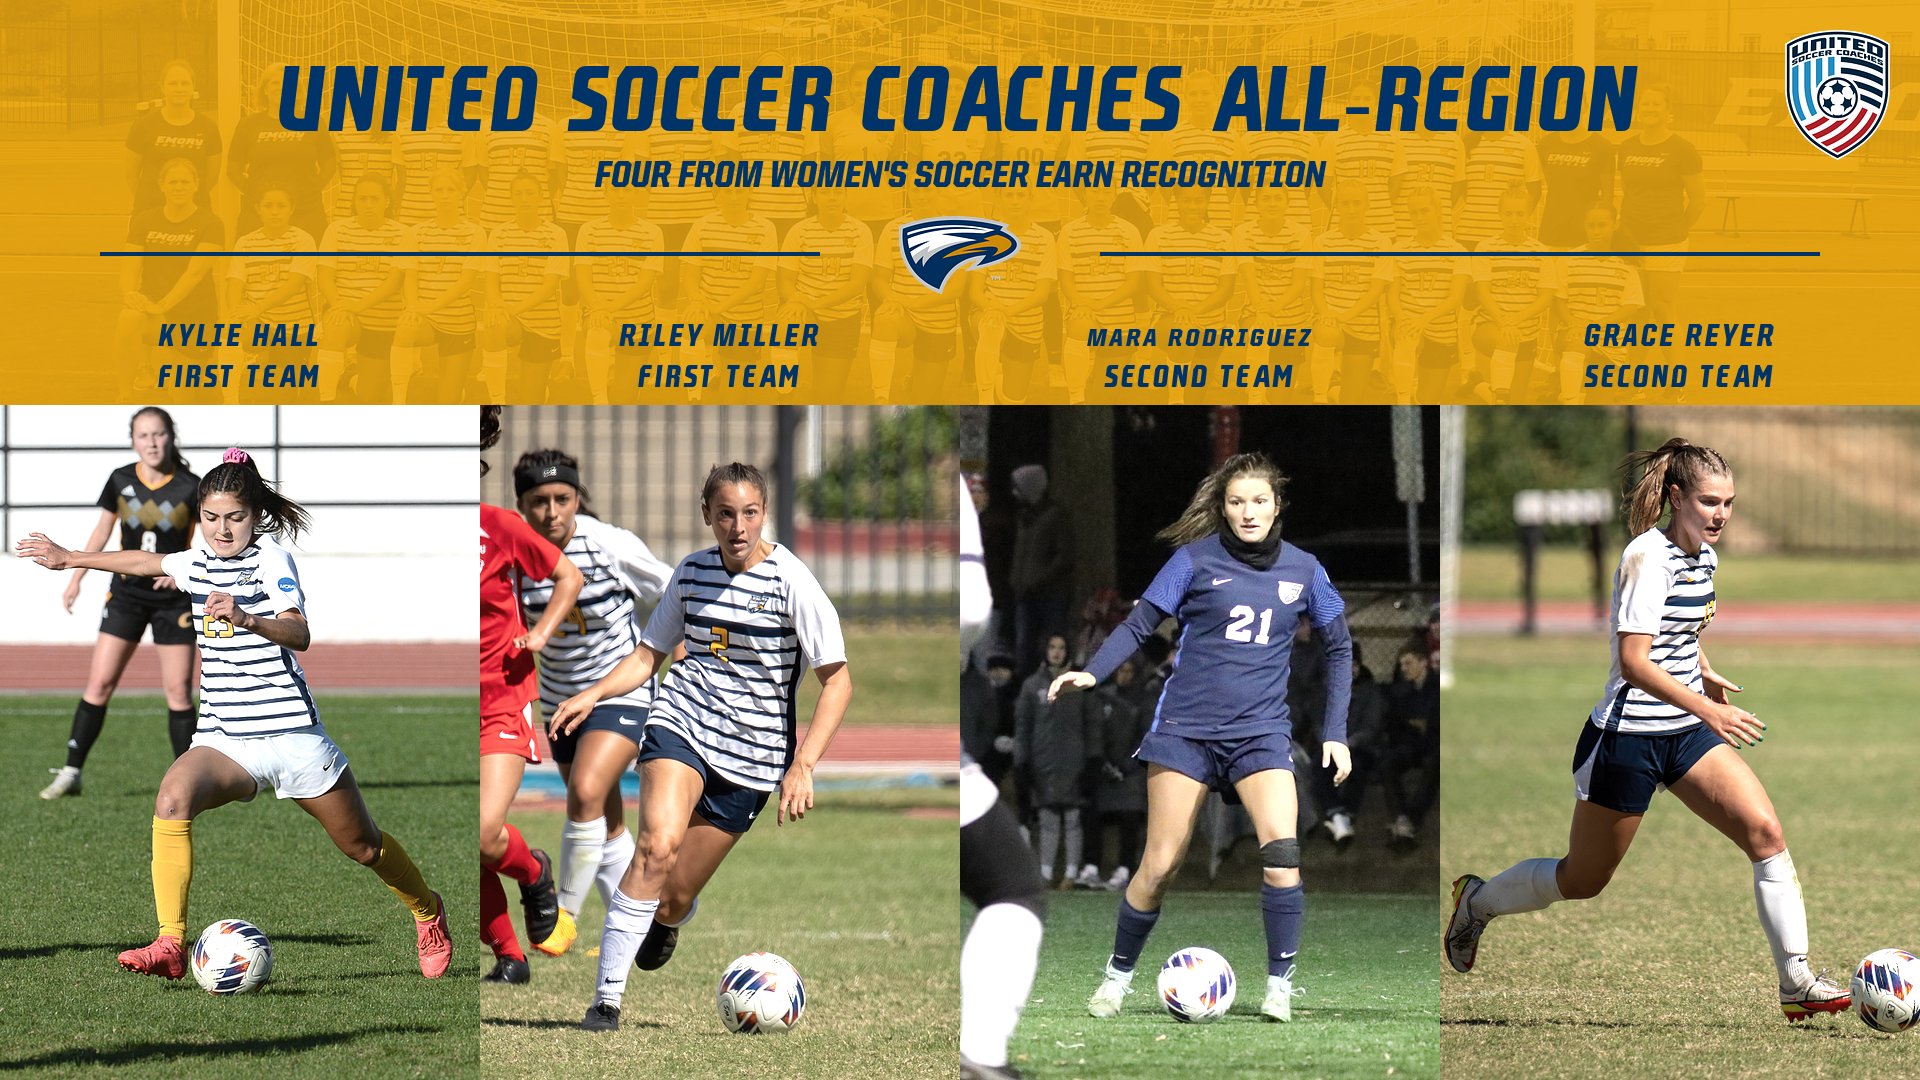 Women's Soccer Place Four on United Soccer Coaches All-Region Teams